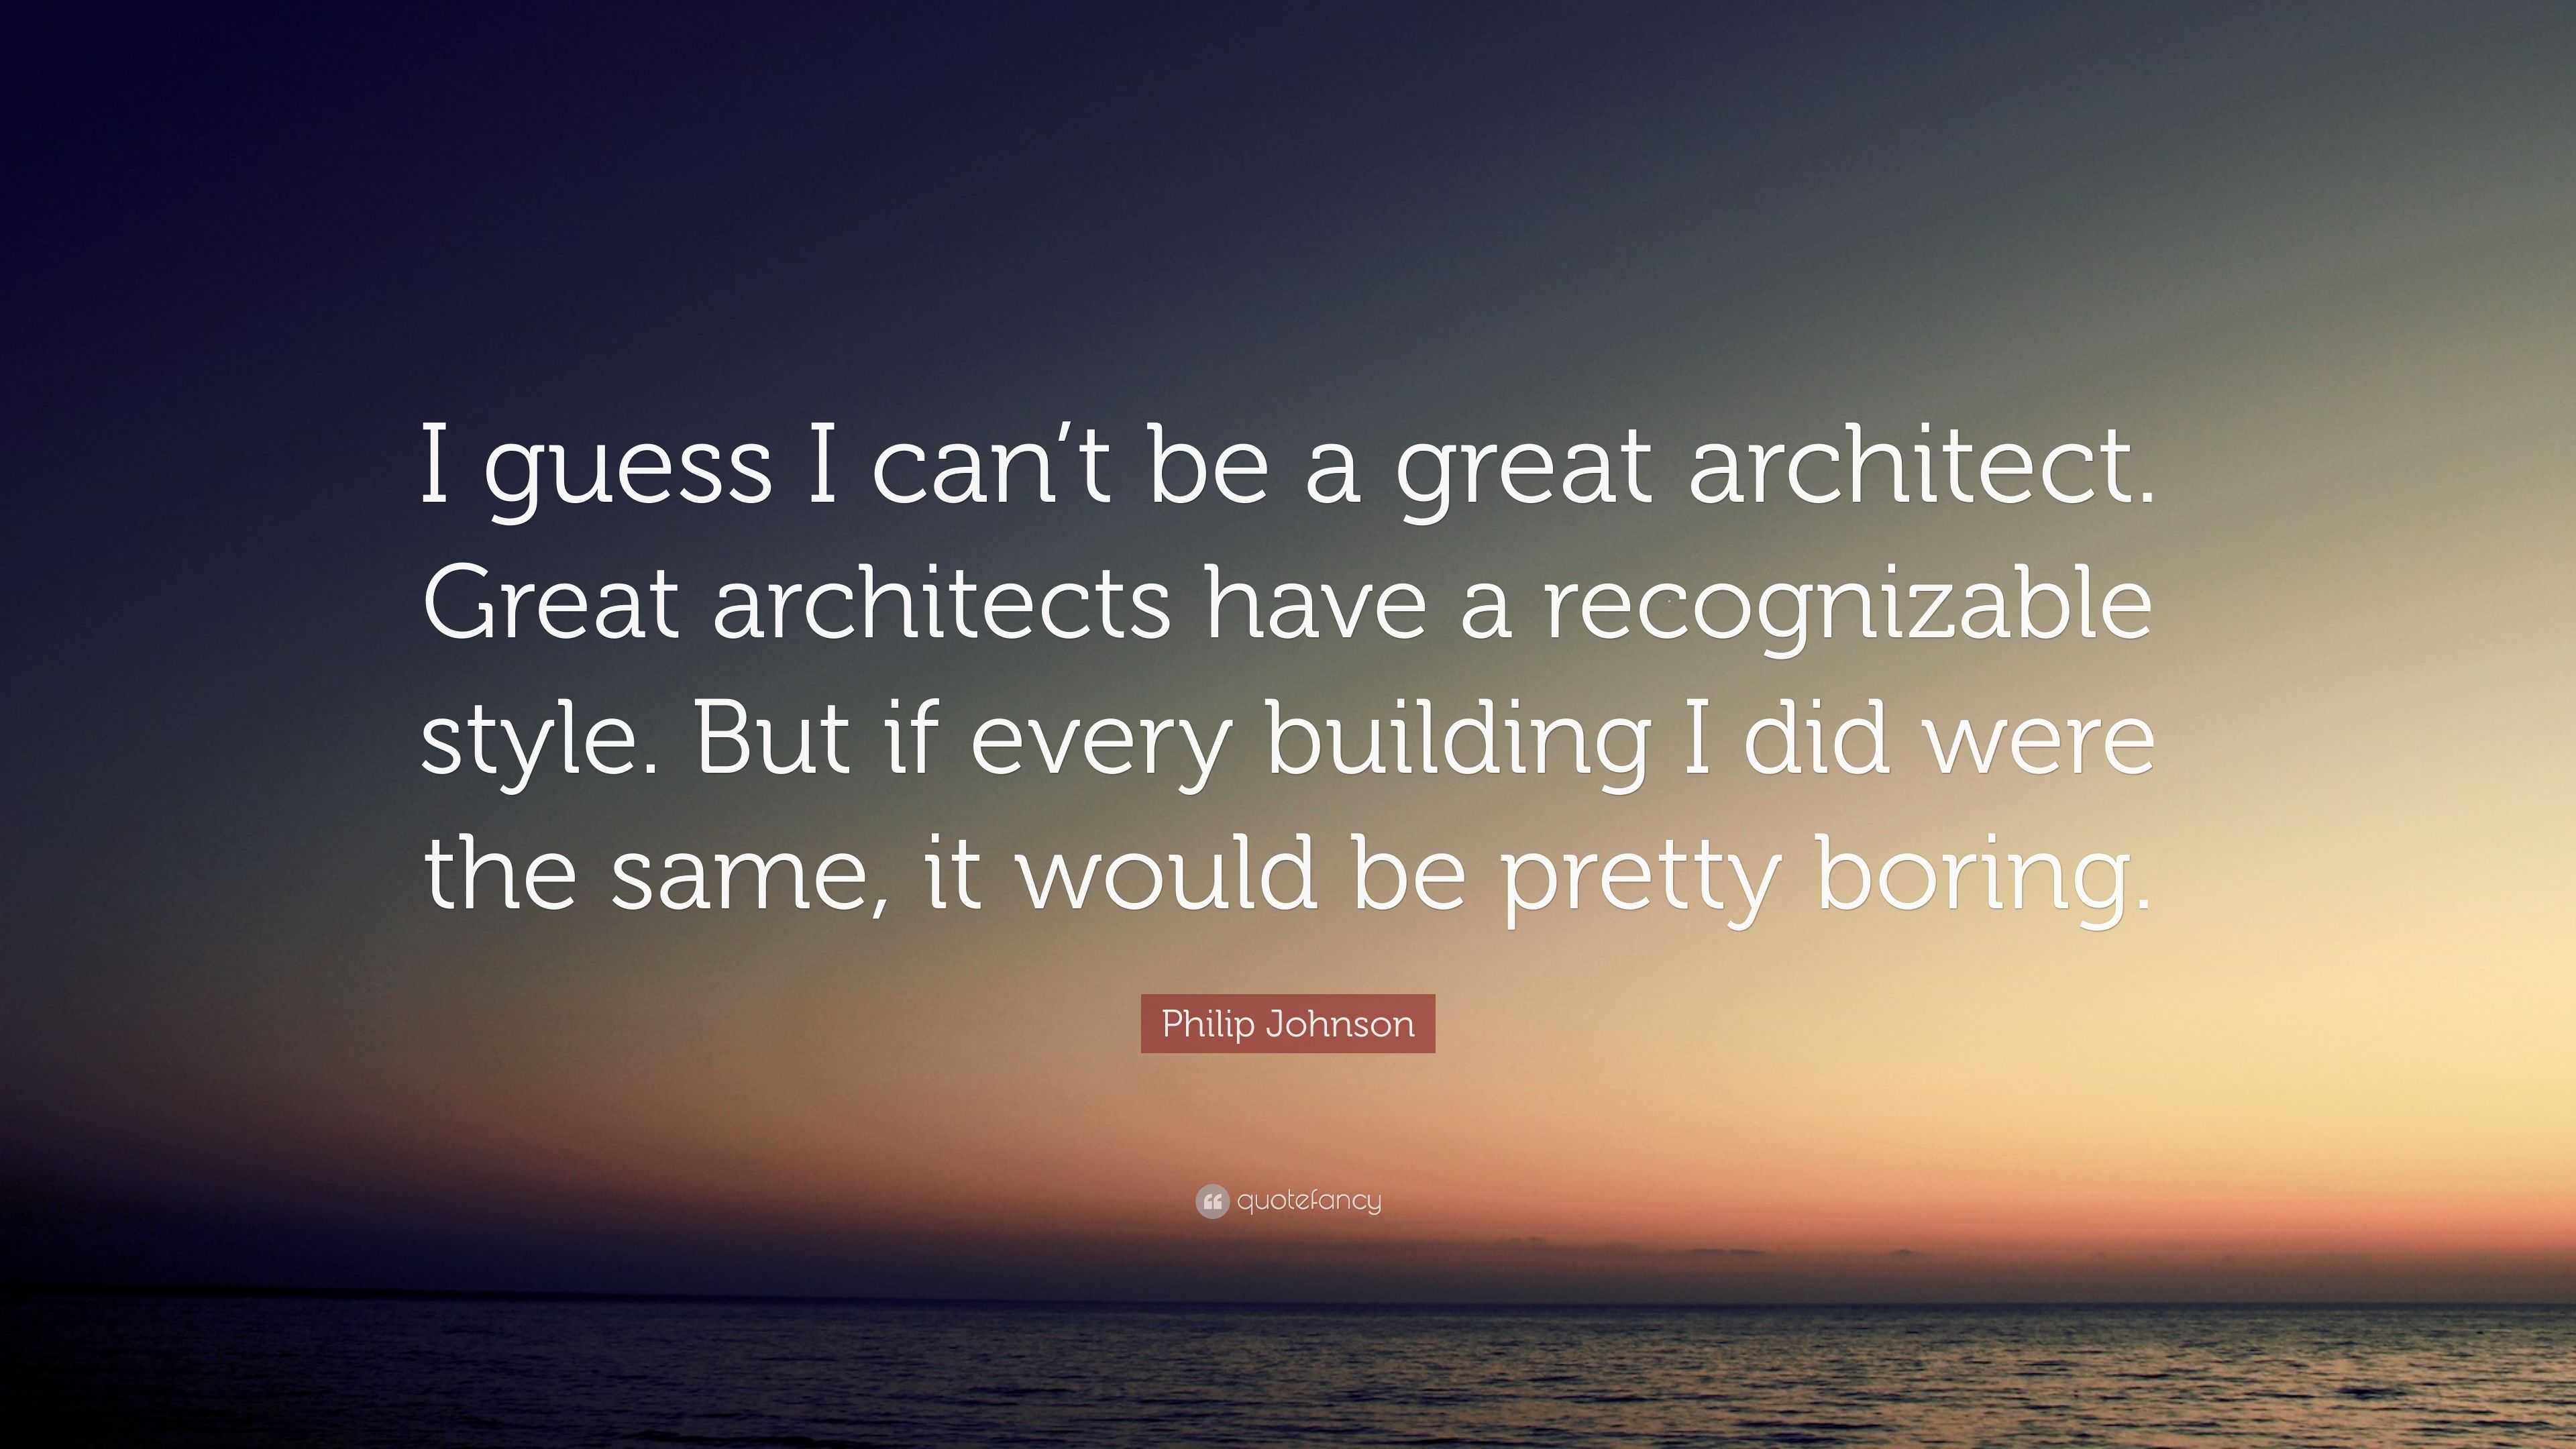 Philip Johnson Quote: “I guess I can’t be a great architect. Great ...